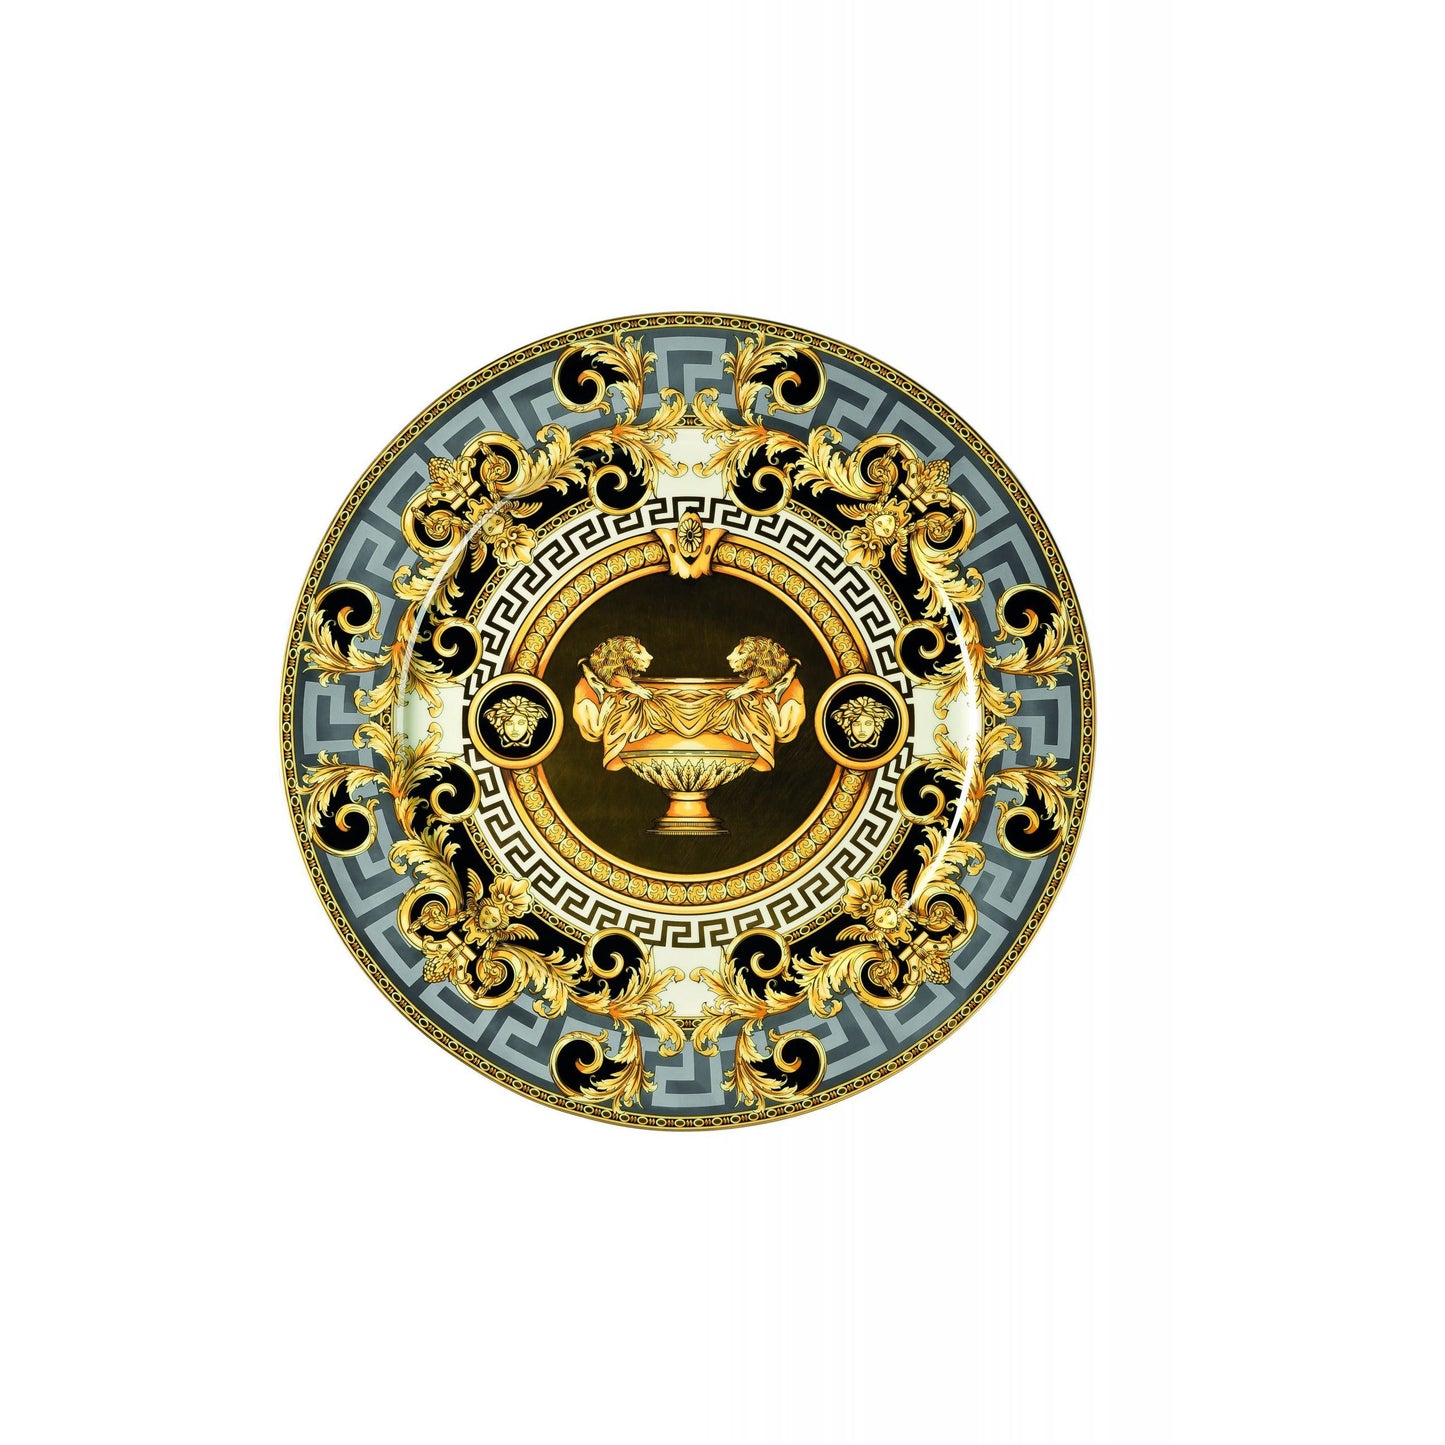 Versace Prestige Gala Charger Plate